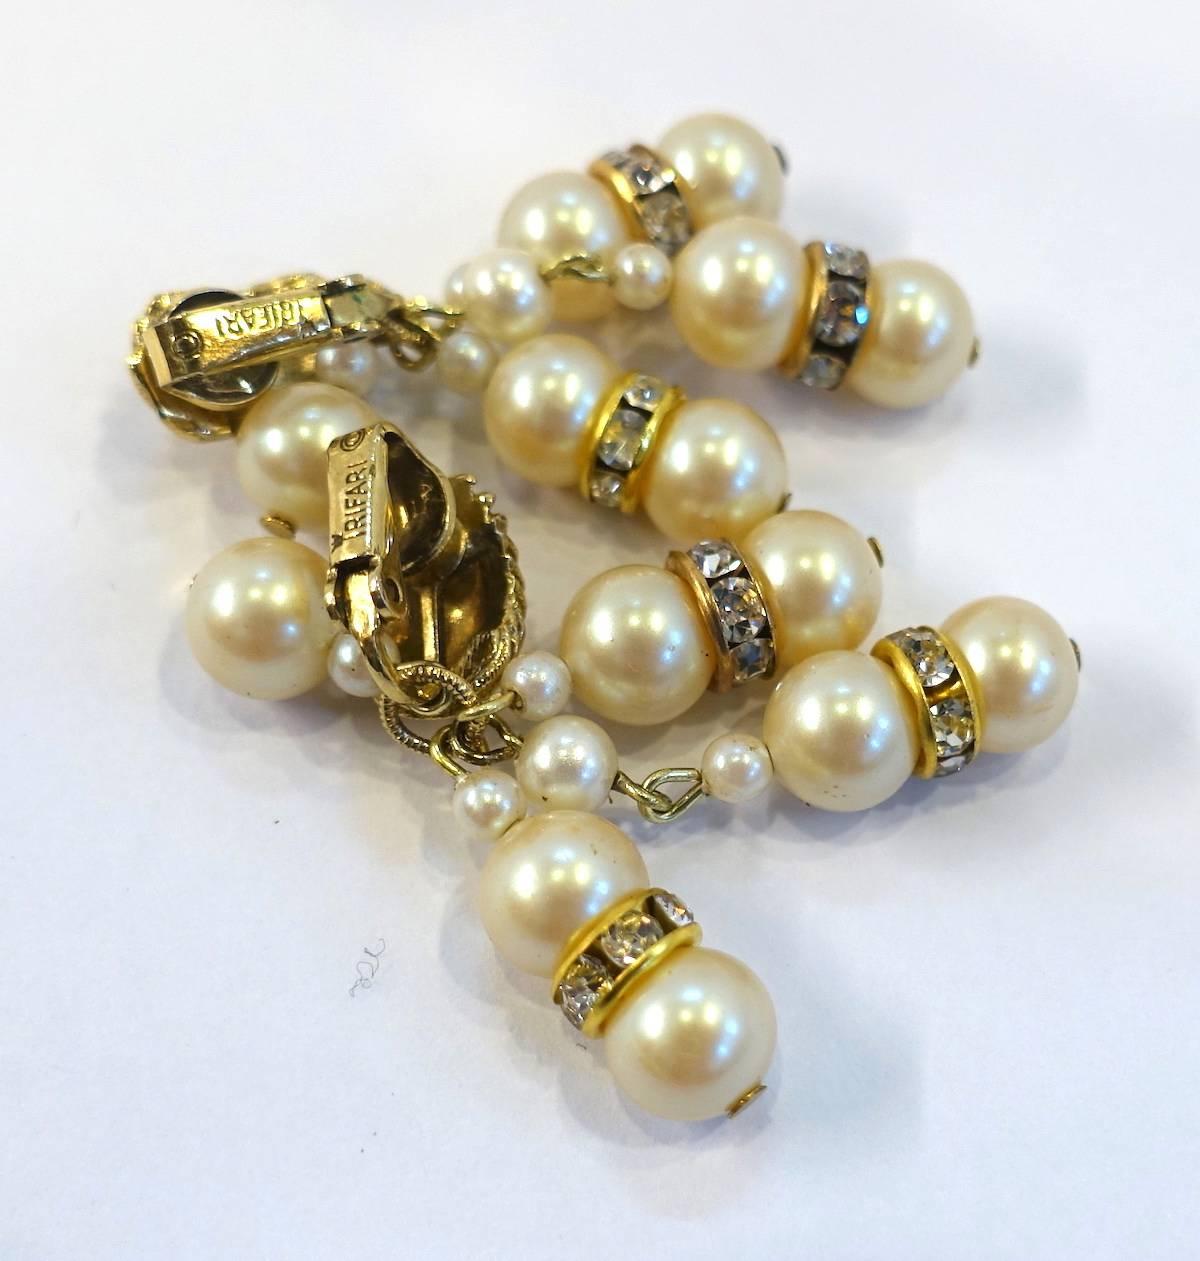 These vintage signed Trifari earrings feature faux pearls with rhondells spacers in a gold-plated base metal setting.  These clip earrings measure 2” x approx. 1” and are signed “Trifari”.  They are in excellent condition.